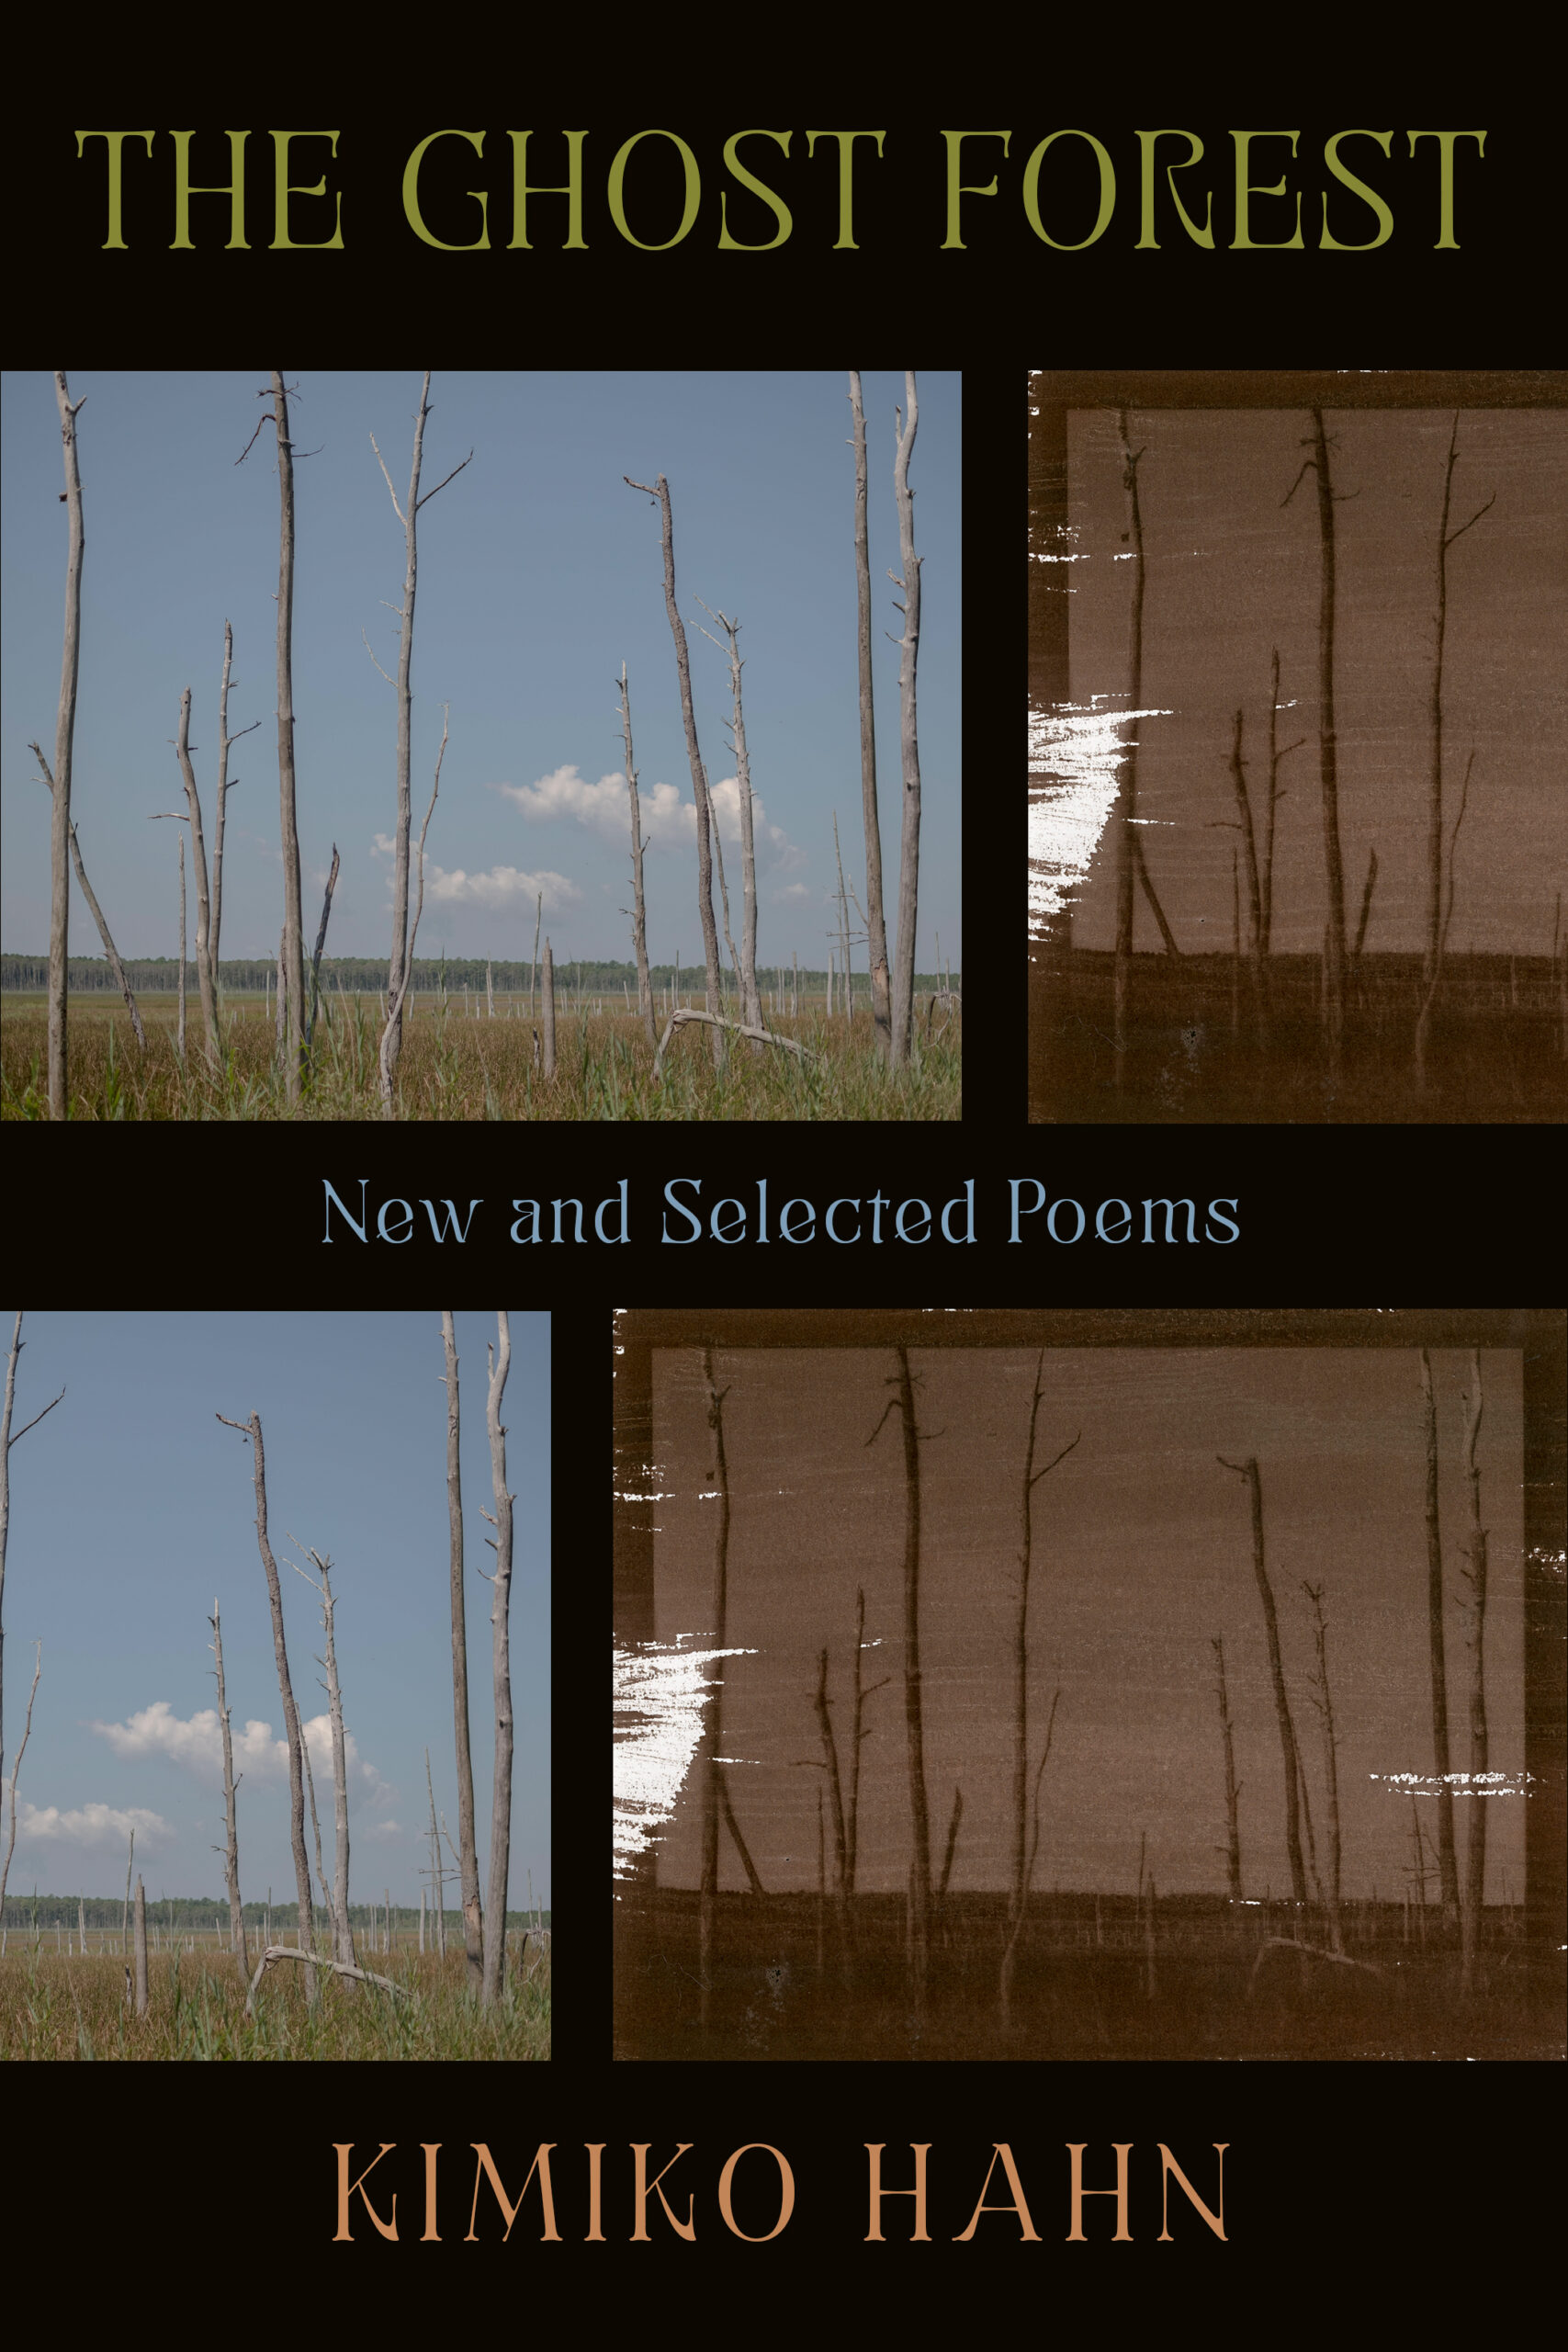 Book Cover Image of “The Ghost Forest: New and Selected Poems”